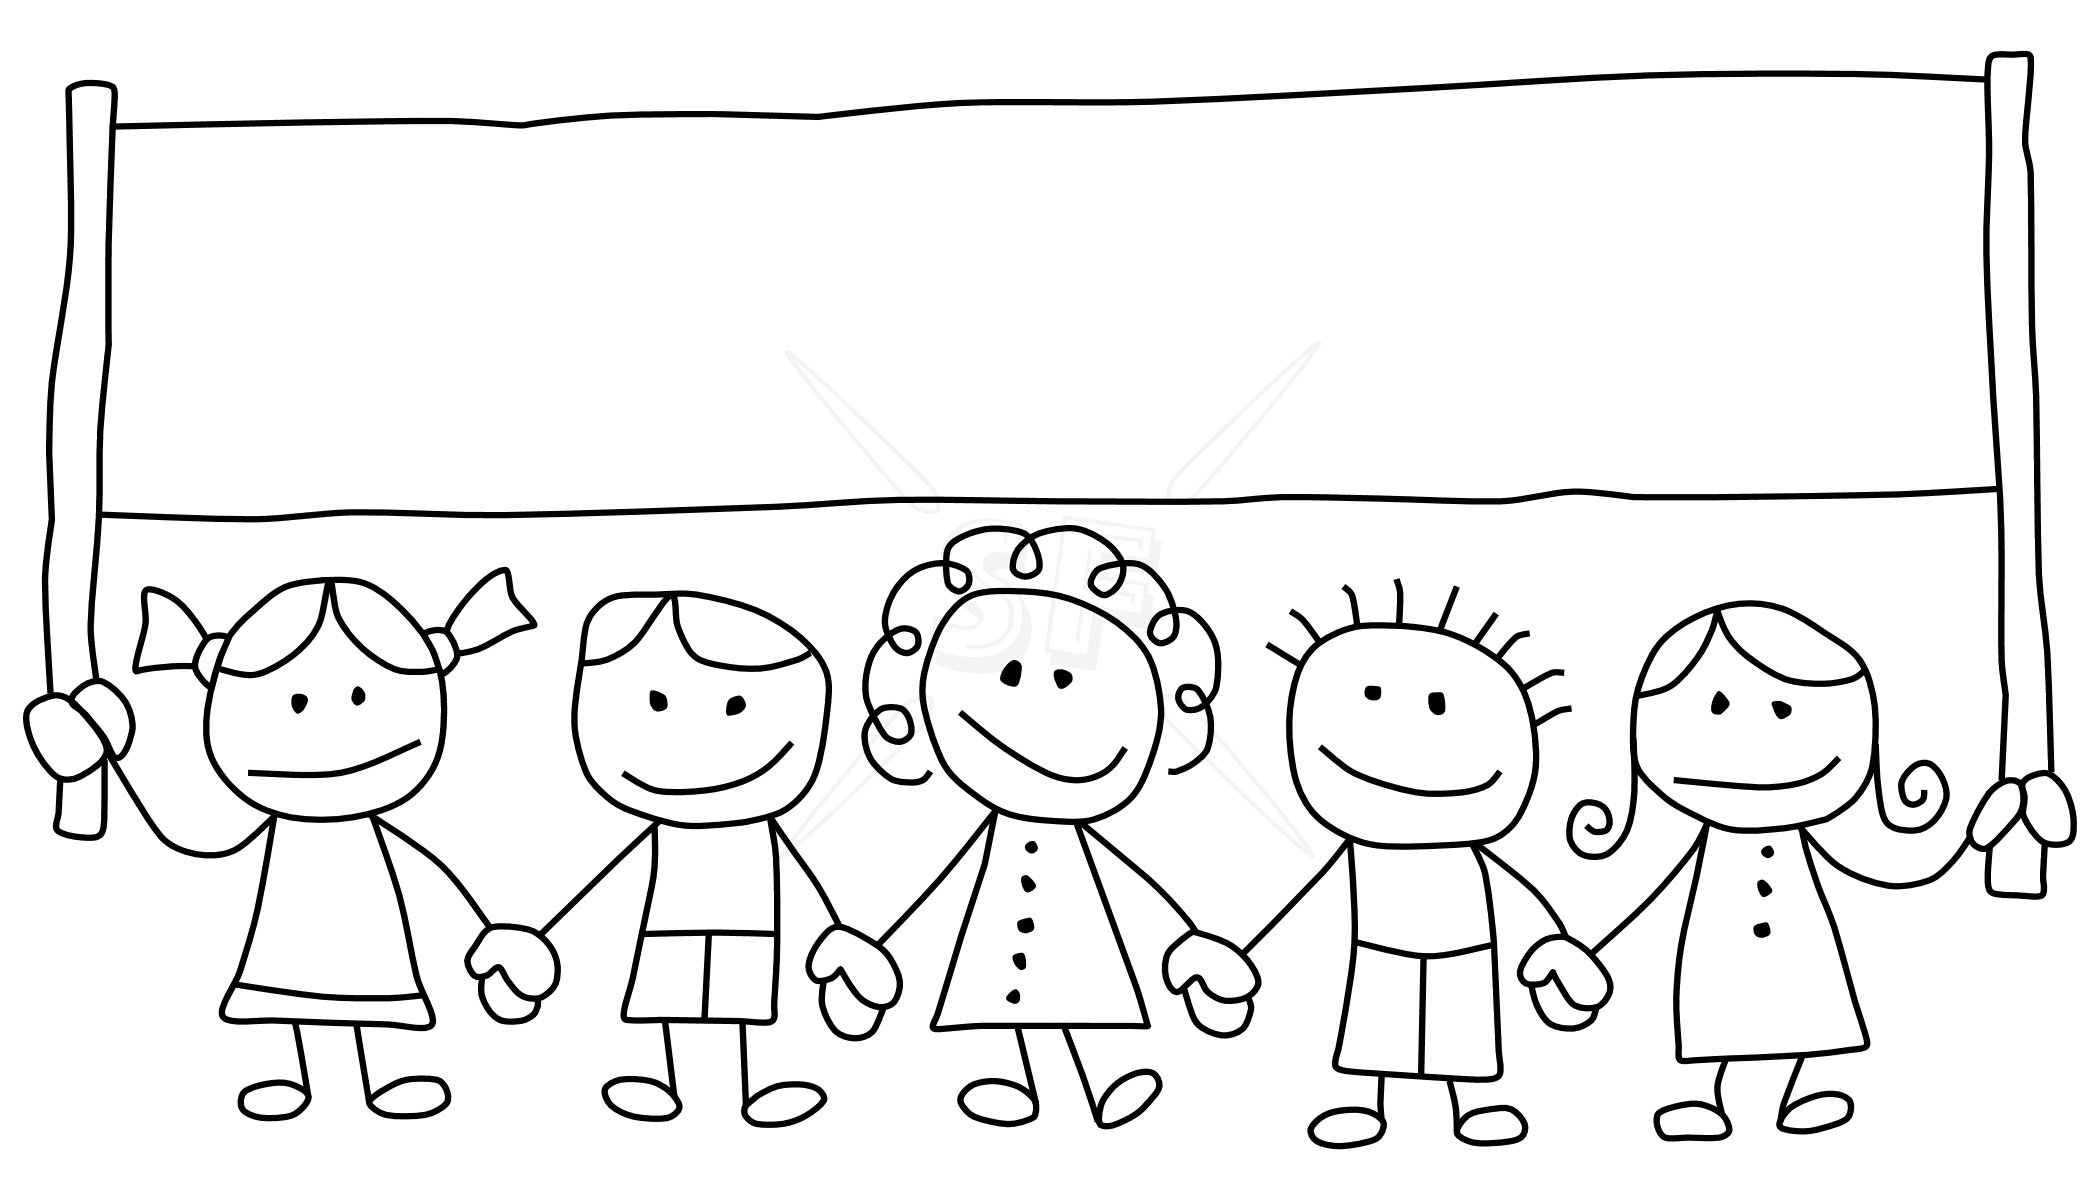 Family black and white clipart black and white family ...